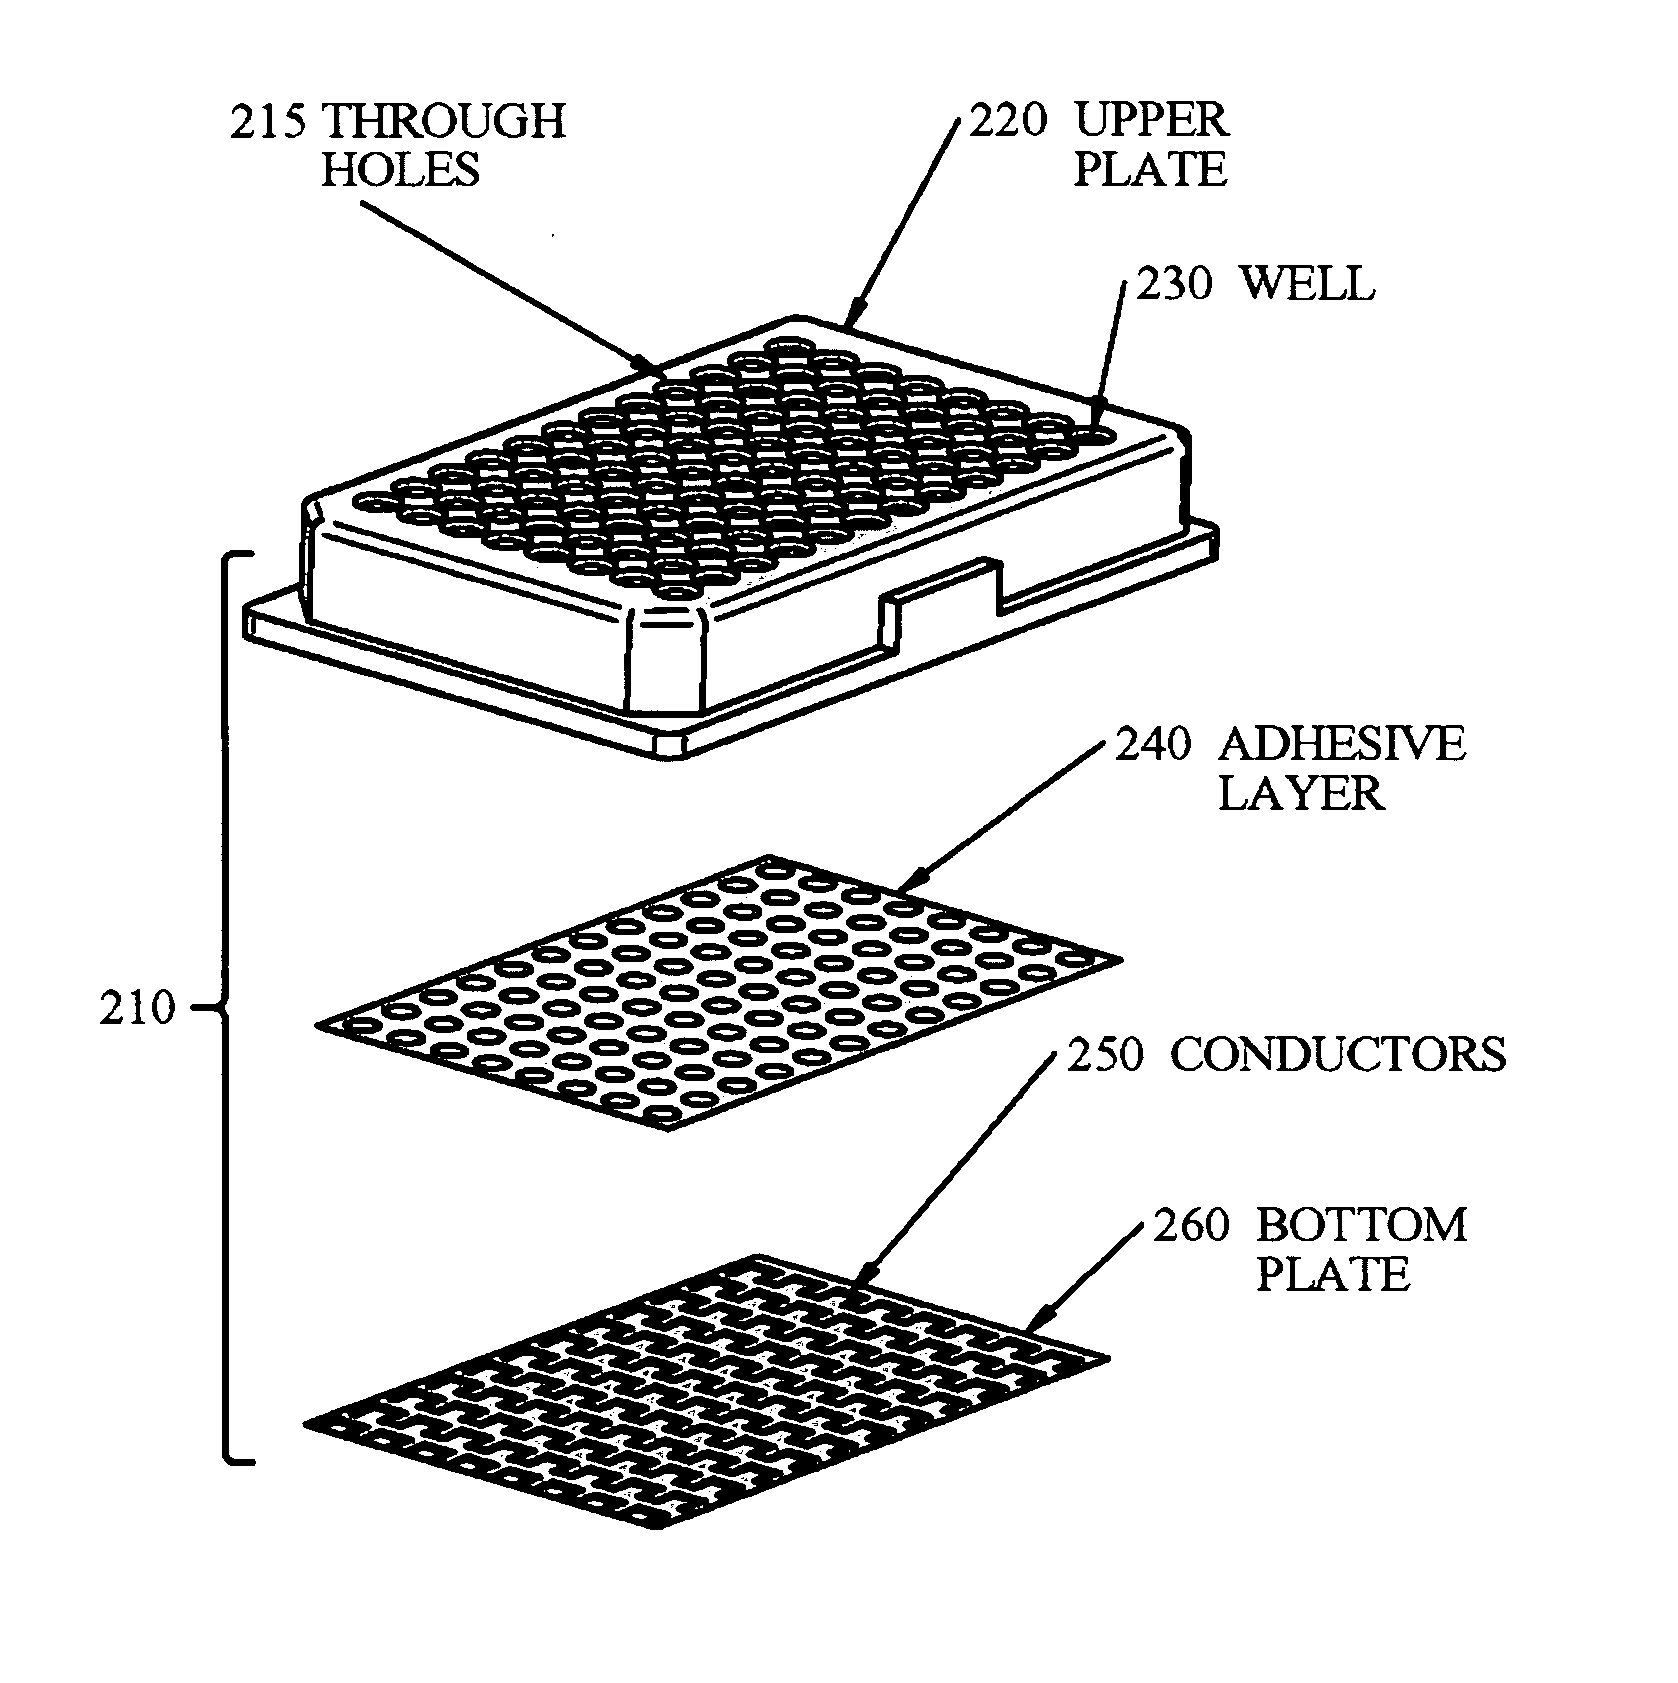 Multiwell sample plate with integrated impedance electrodes and connection scheme